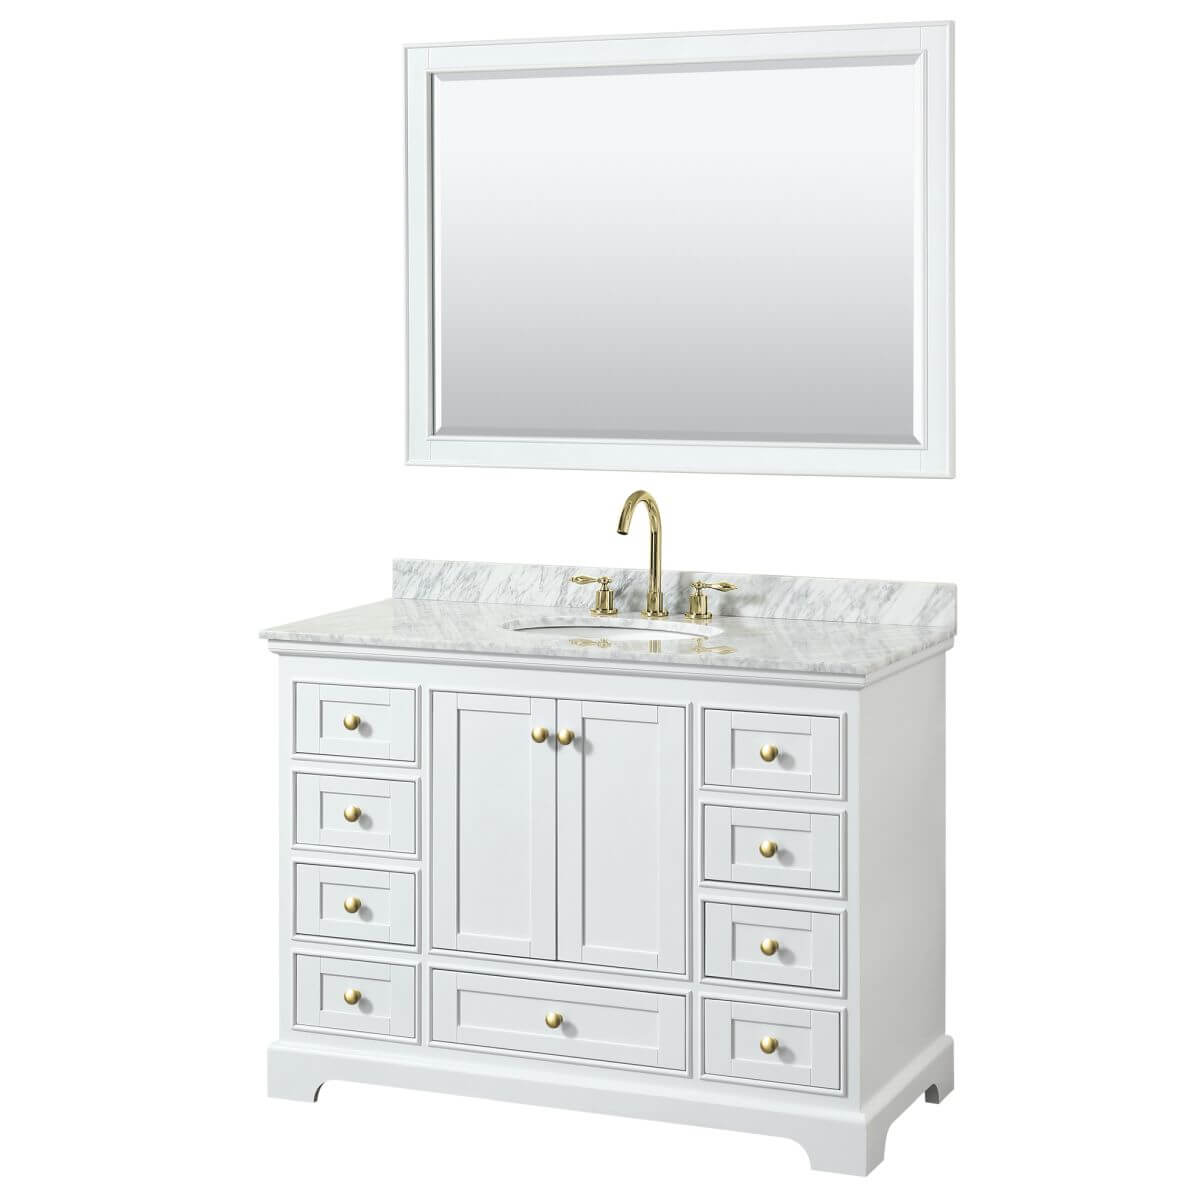 Wyndham Collection Deborah 48 inch Single Bathroom Vanity in White with White Carrara Marble Countertop, Undermount Oval Sink, Brushed Gold Trim and 46 inch Mirror - WCS202048SWGCMUNOM46